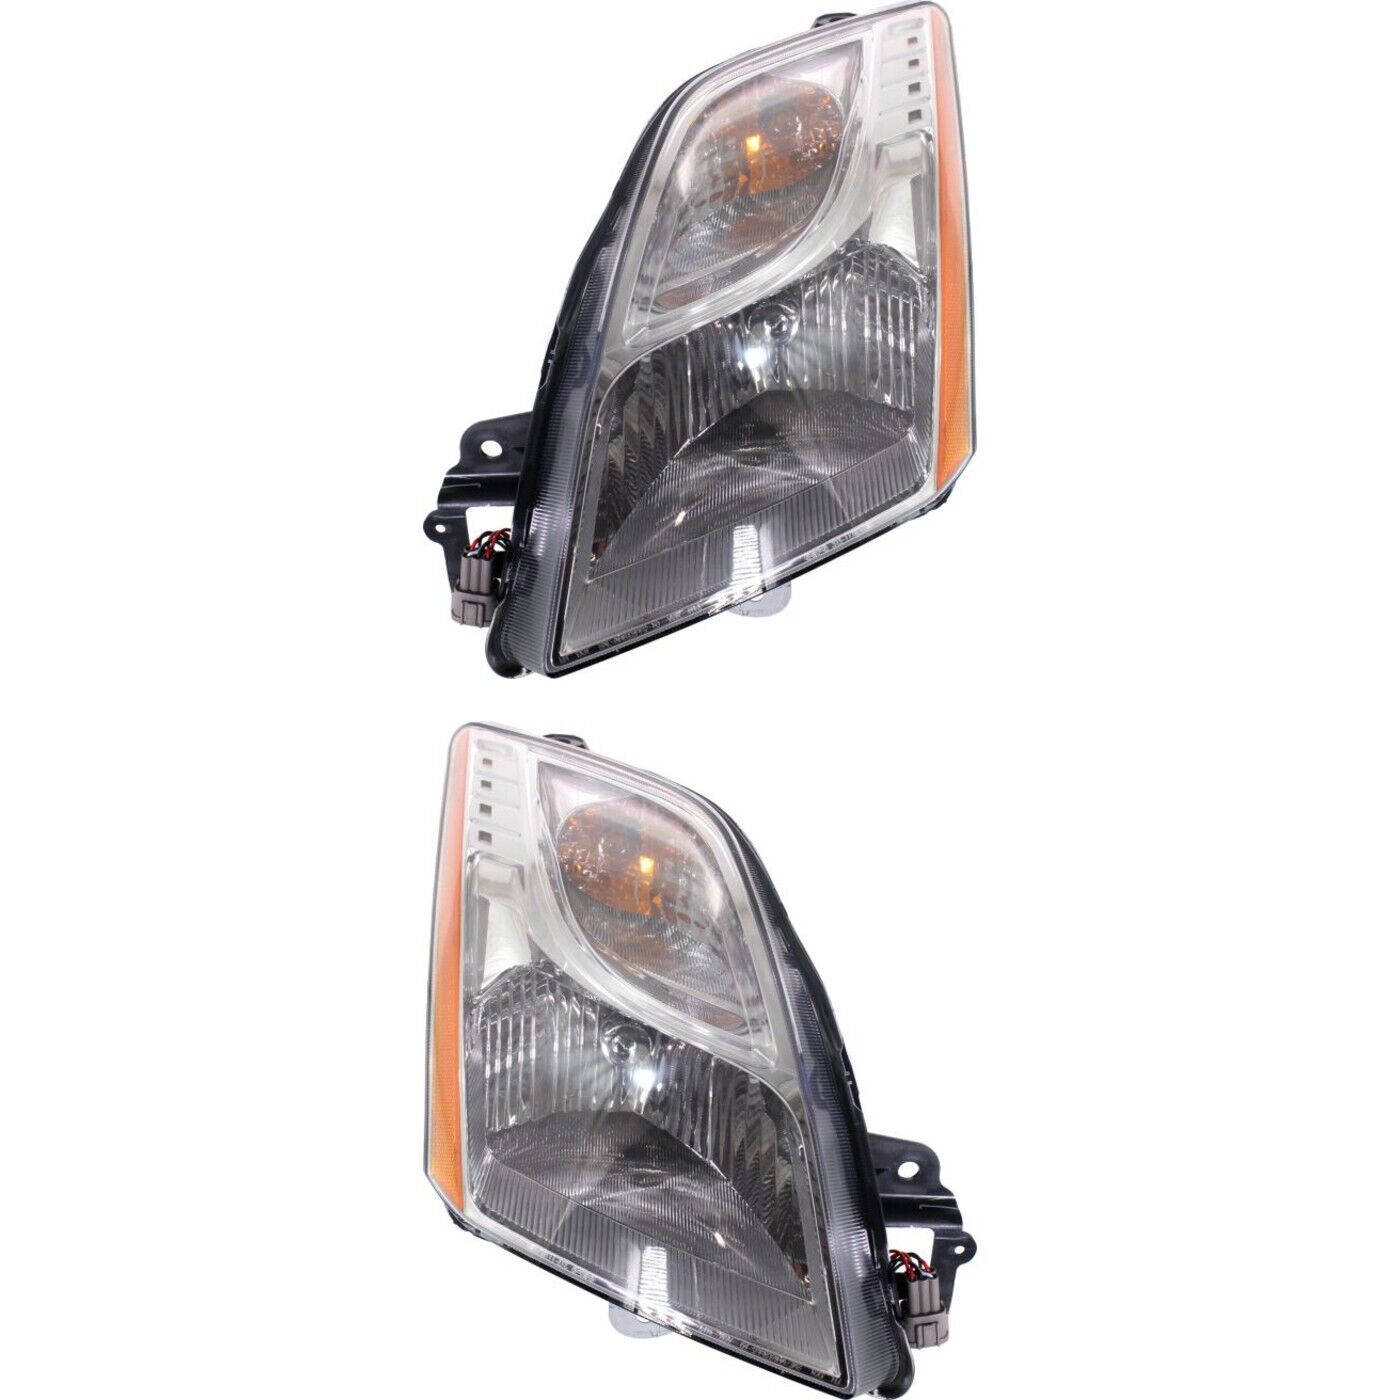 Headlight w/ Chrome Int. LH and RH For 2010-2012 Nissan Sentra Base/S/SL Models